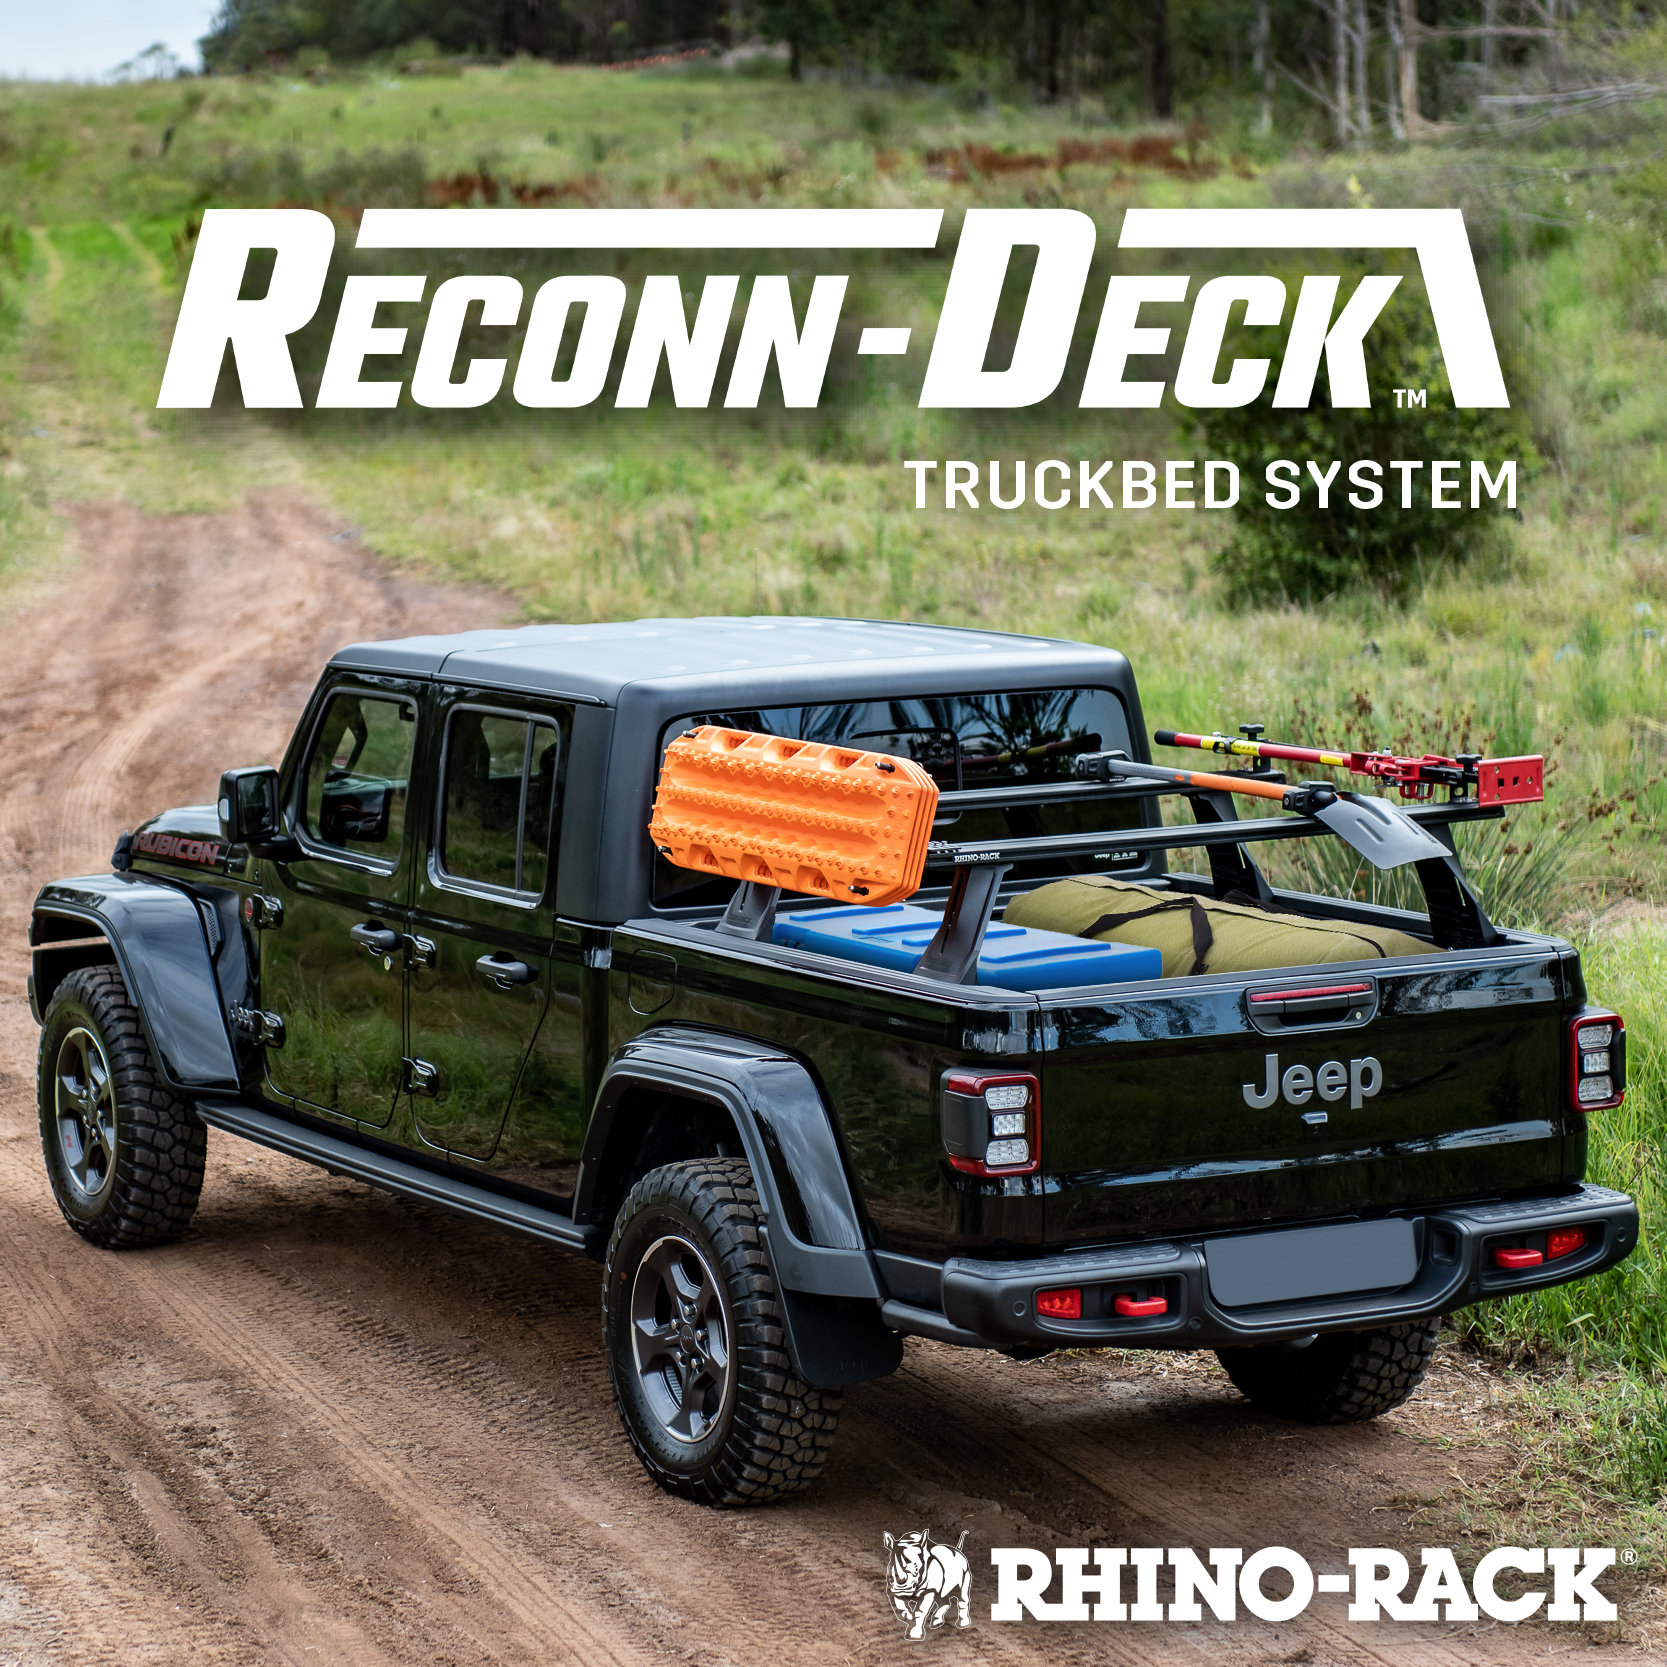 Featured Product: Rhino-Rack Reconn-Deck Truck Bed System | THE SHOP